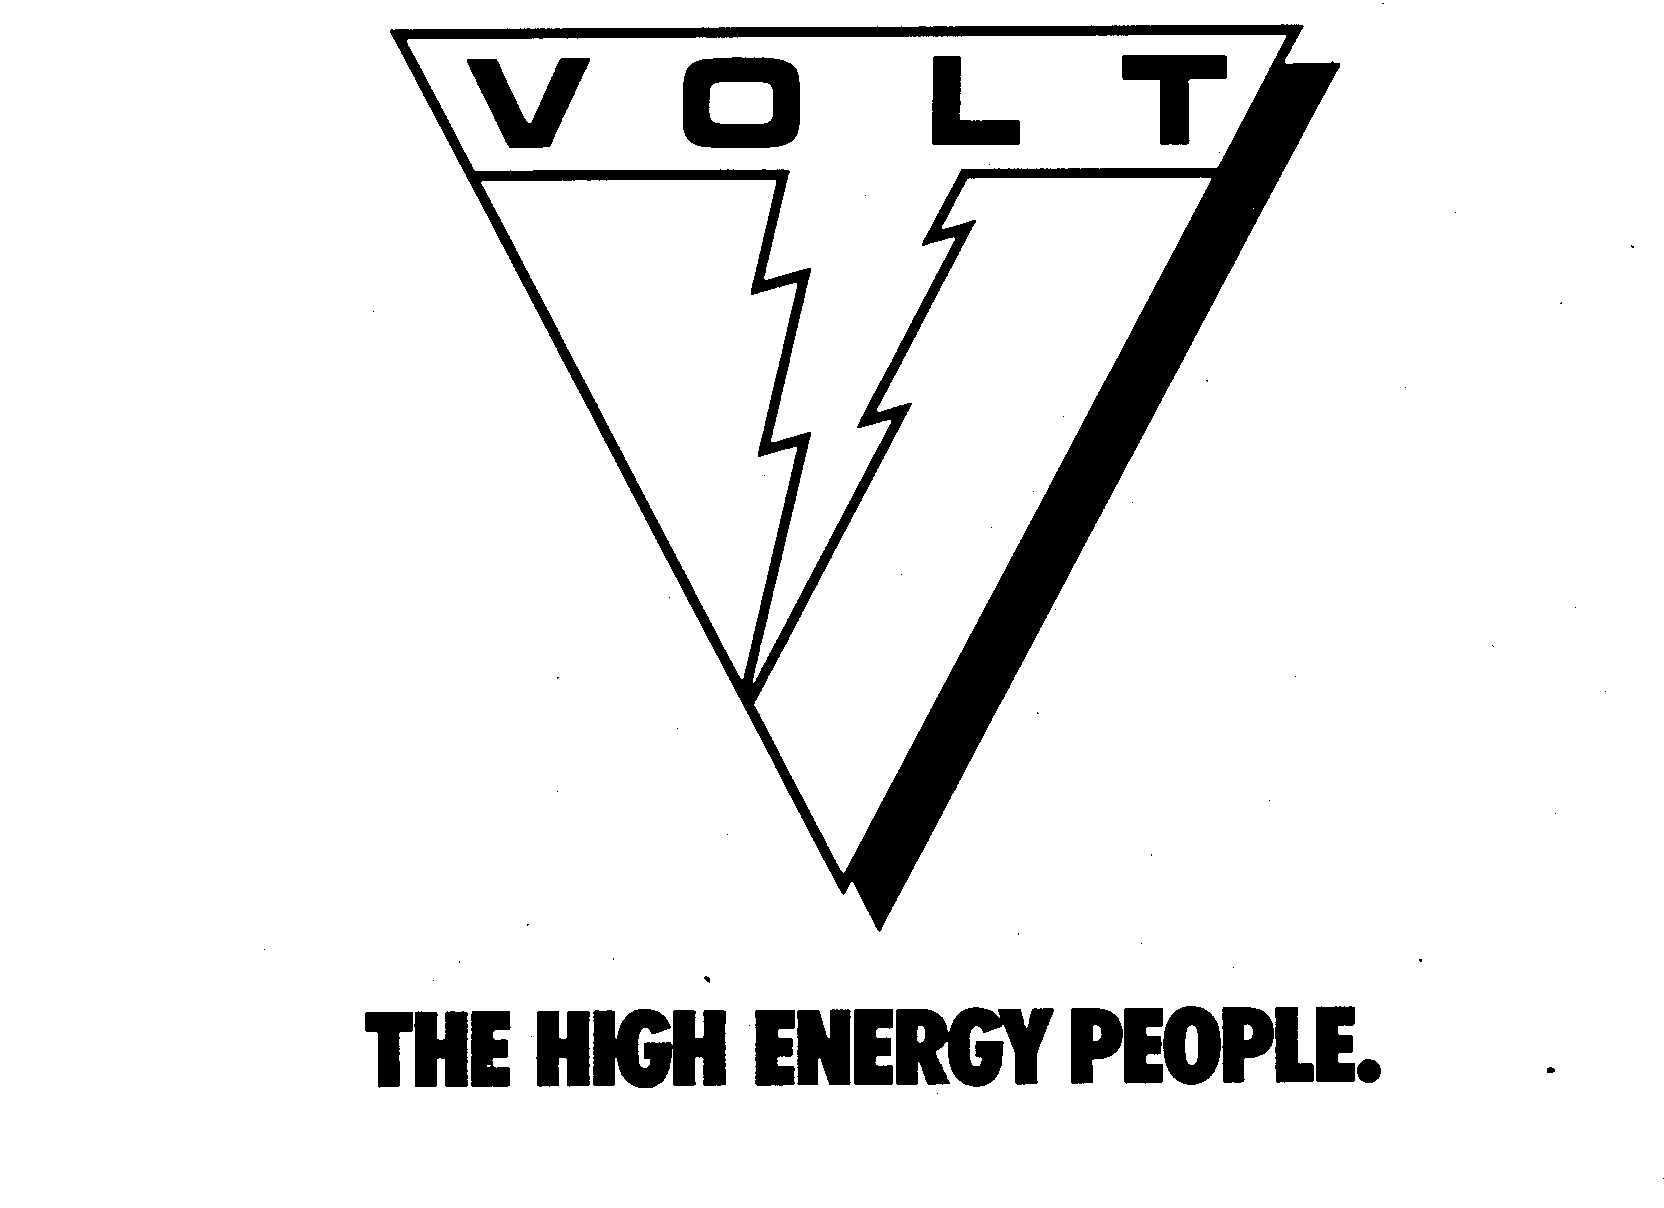  VOLT THE HIGH ENERGY PEOPLE.